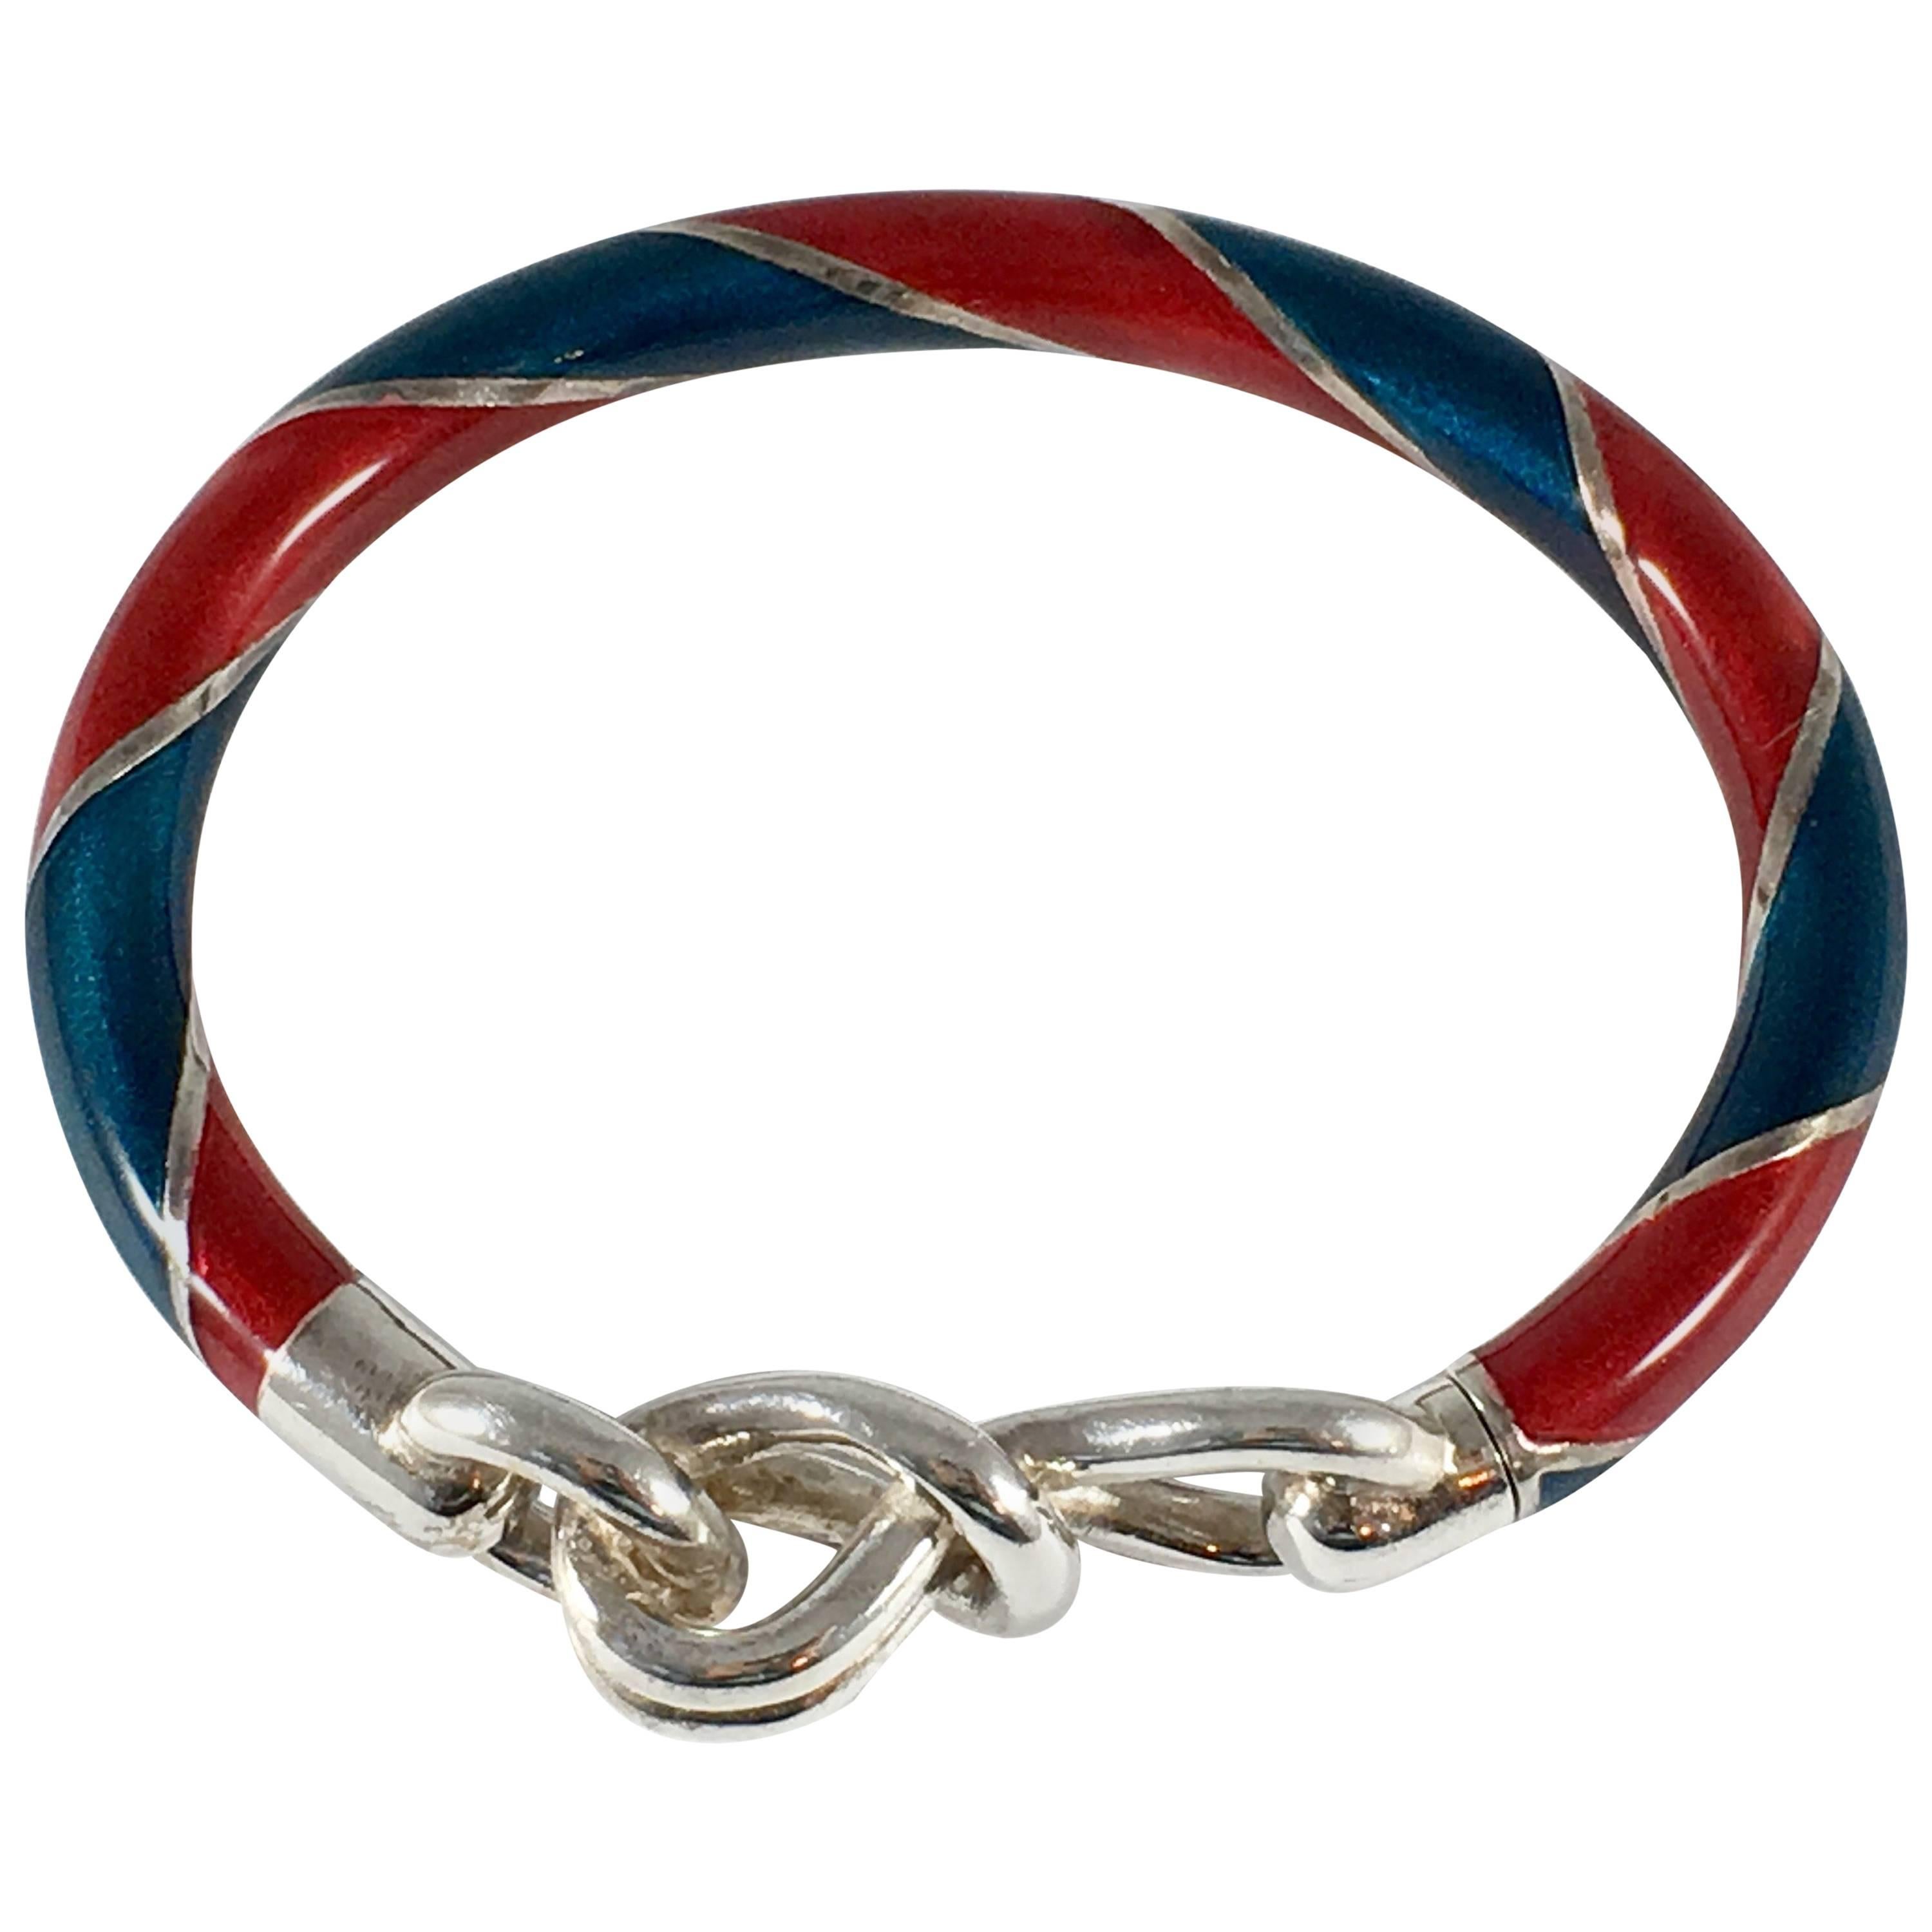 Vintage Gucci Sterling Silver Bracelet with Enamel Stripes of Red and Blue 1980s For Sale